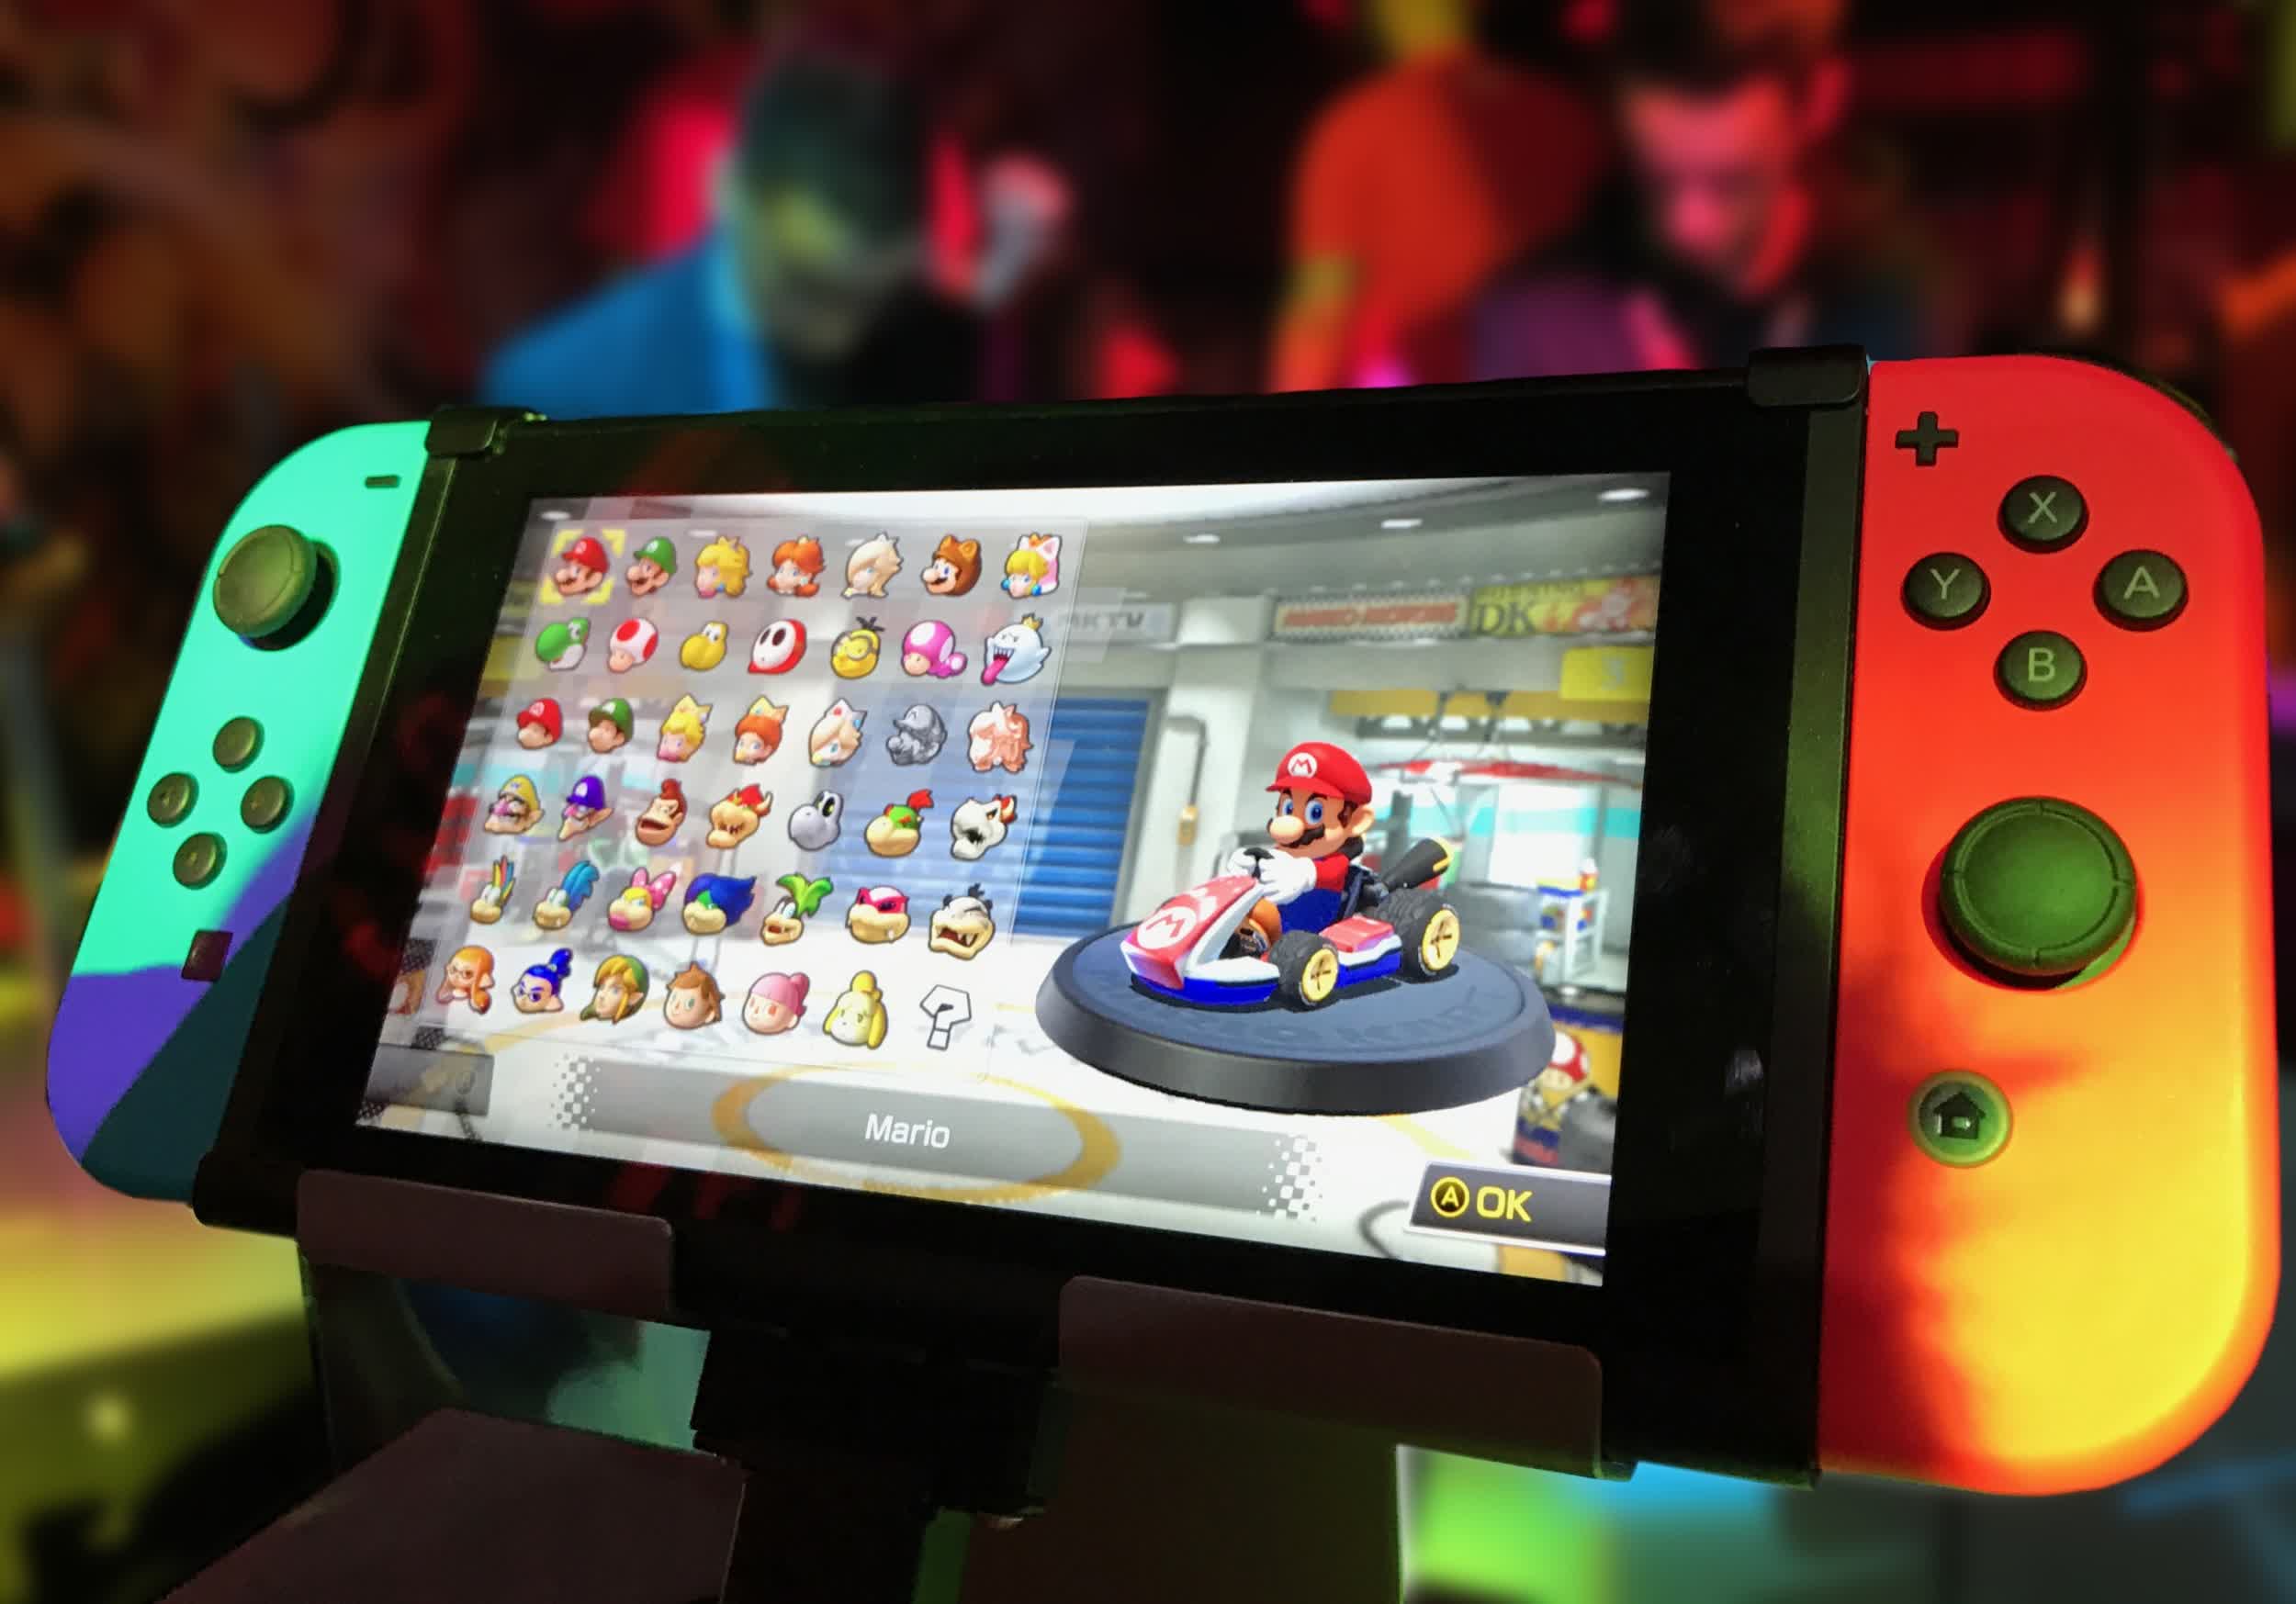 Nintendo engineers say Switch Joy-Con drift is caused by wear, and is unavoidable